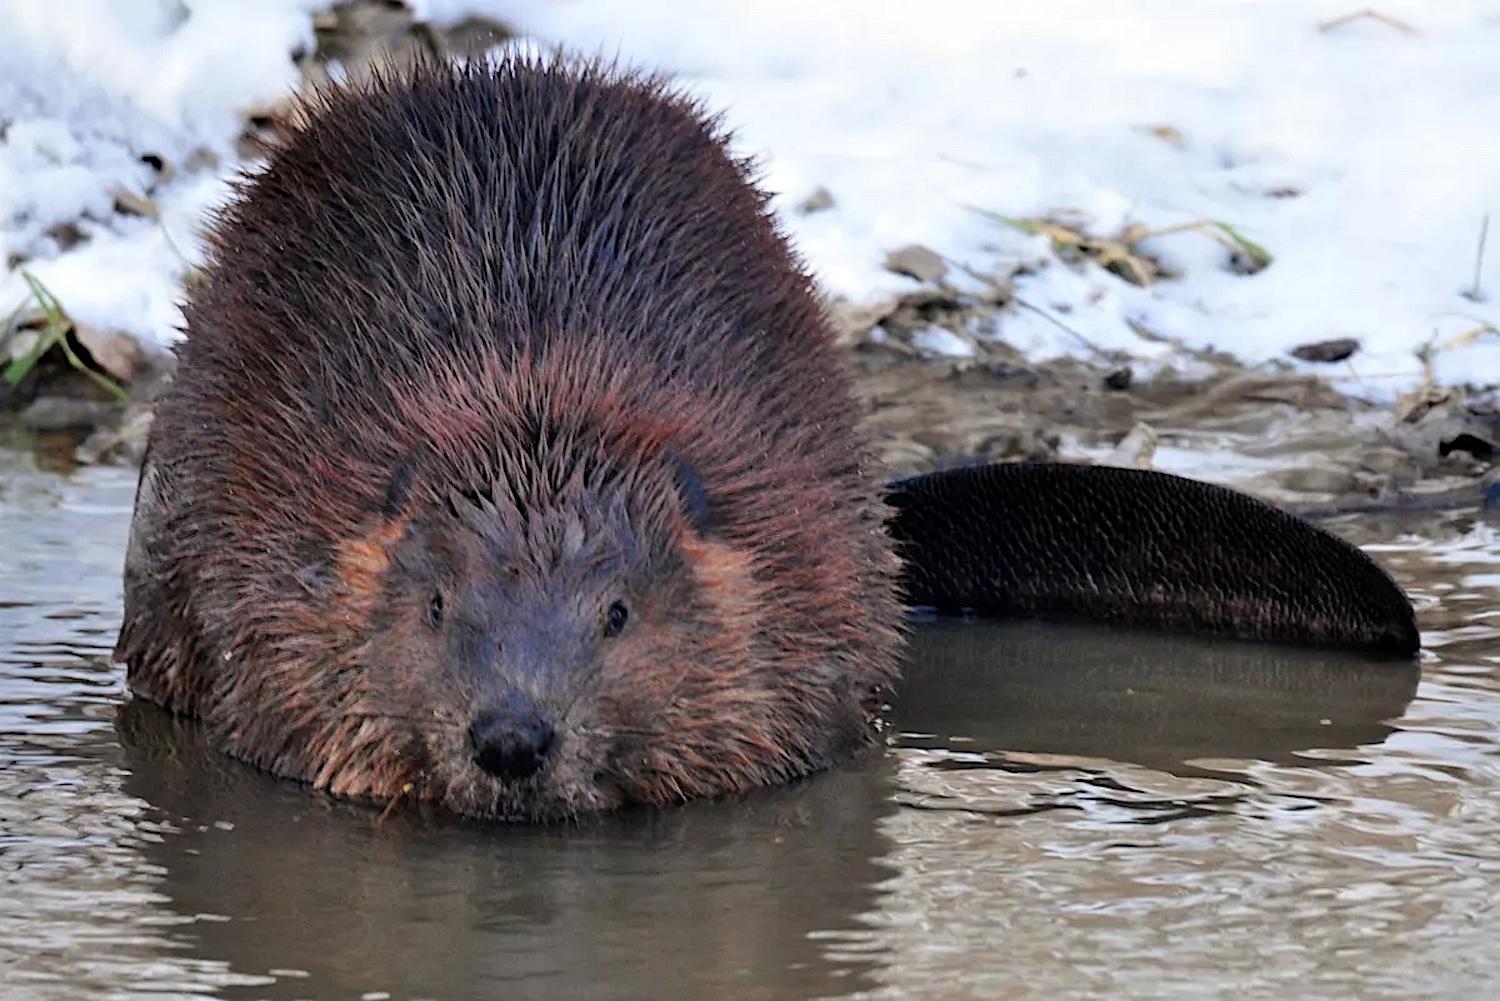 Beavers are being summoned to help national parks restore wetlands/NPS file